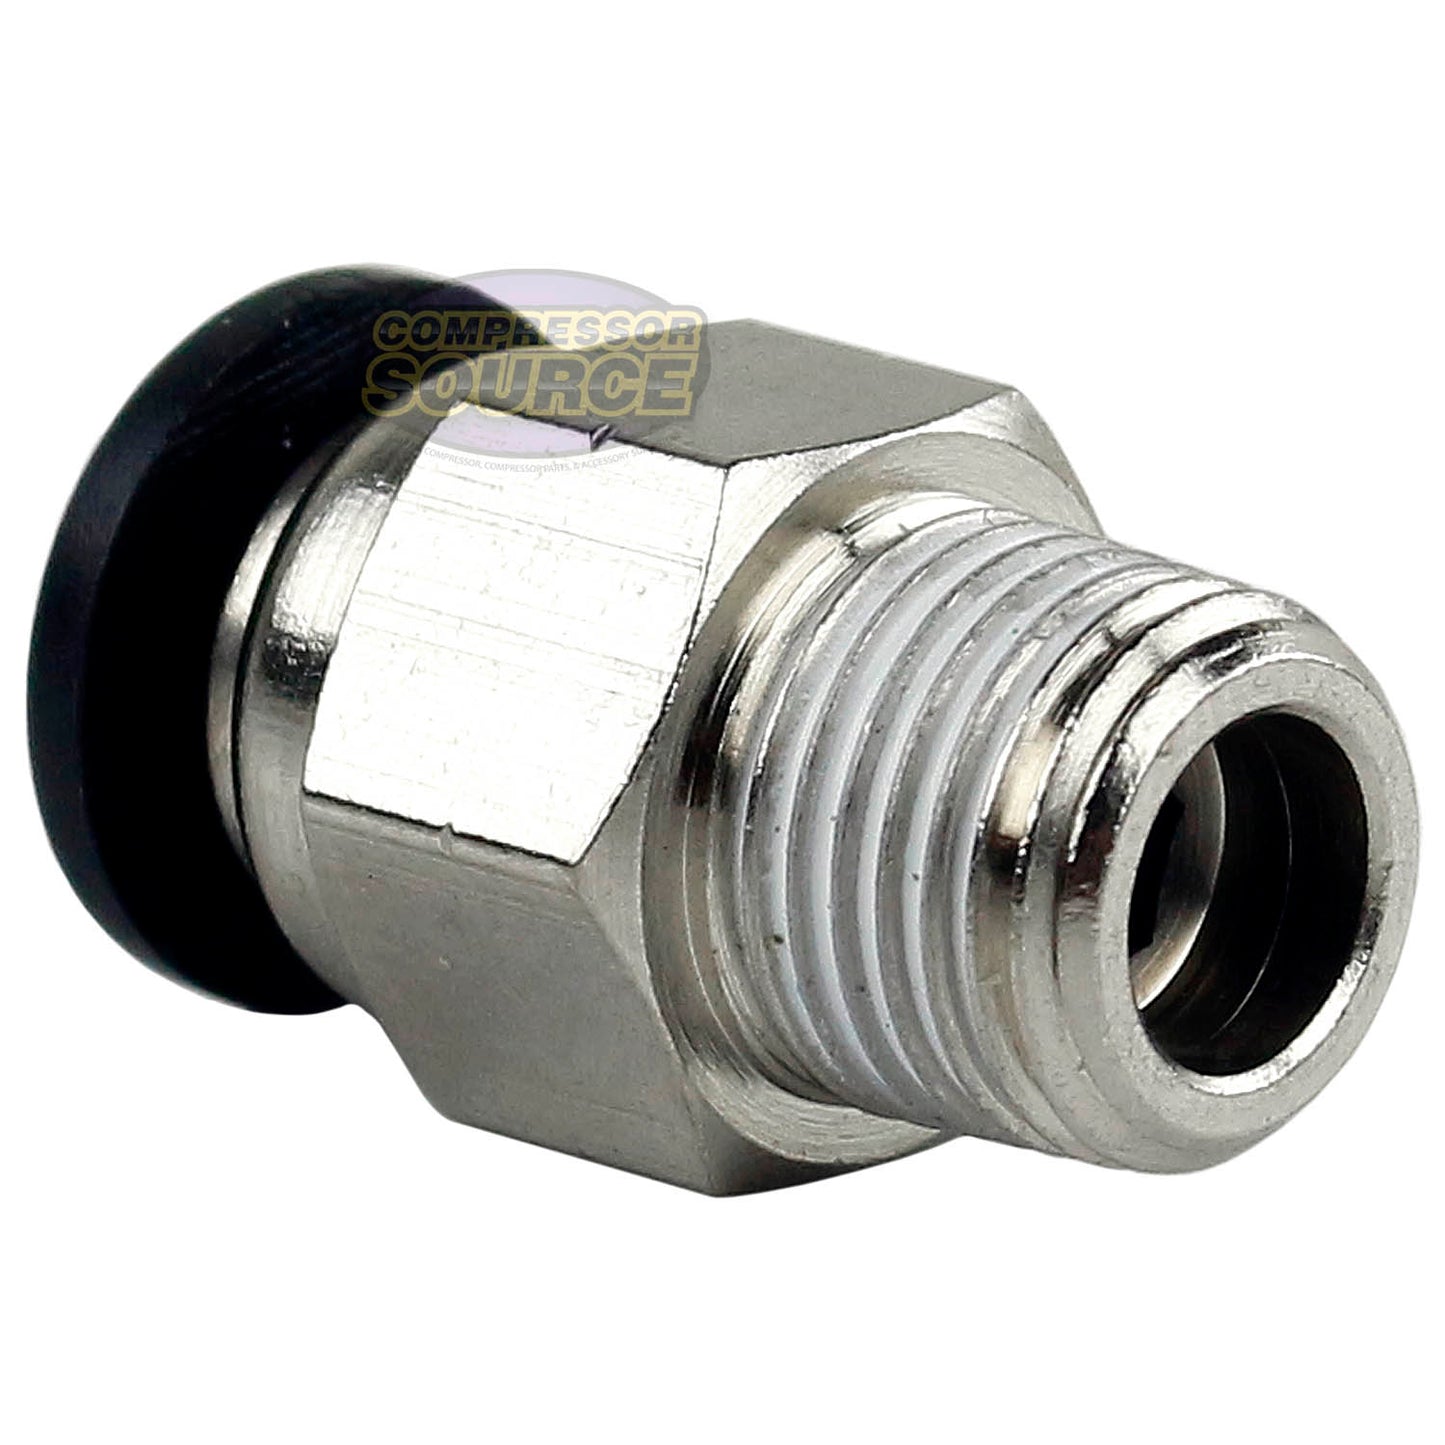 One 1/8" Male NPT x 1/4 OD Tube Female Push In To Lock Connect Fitting Straight